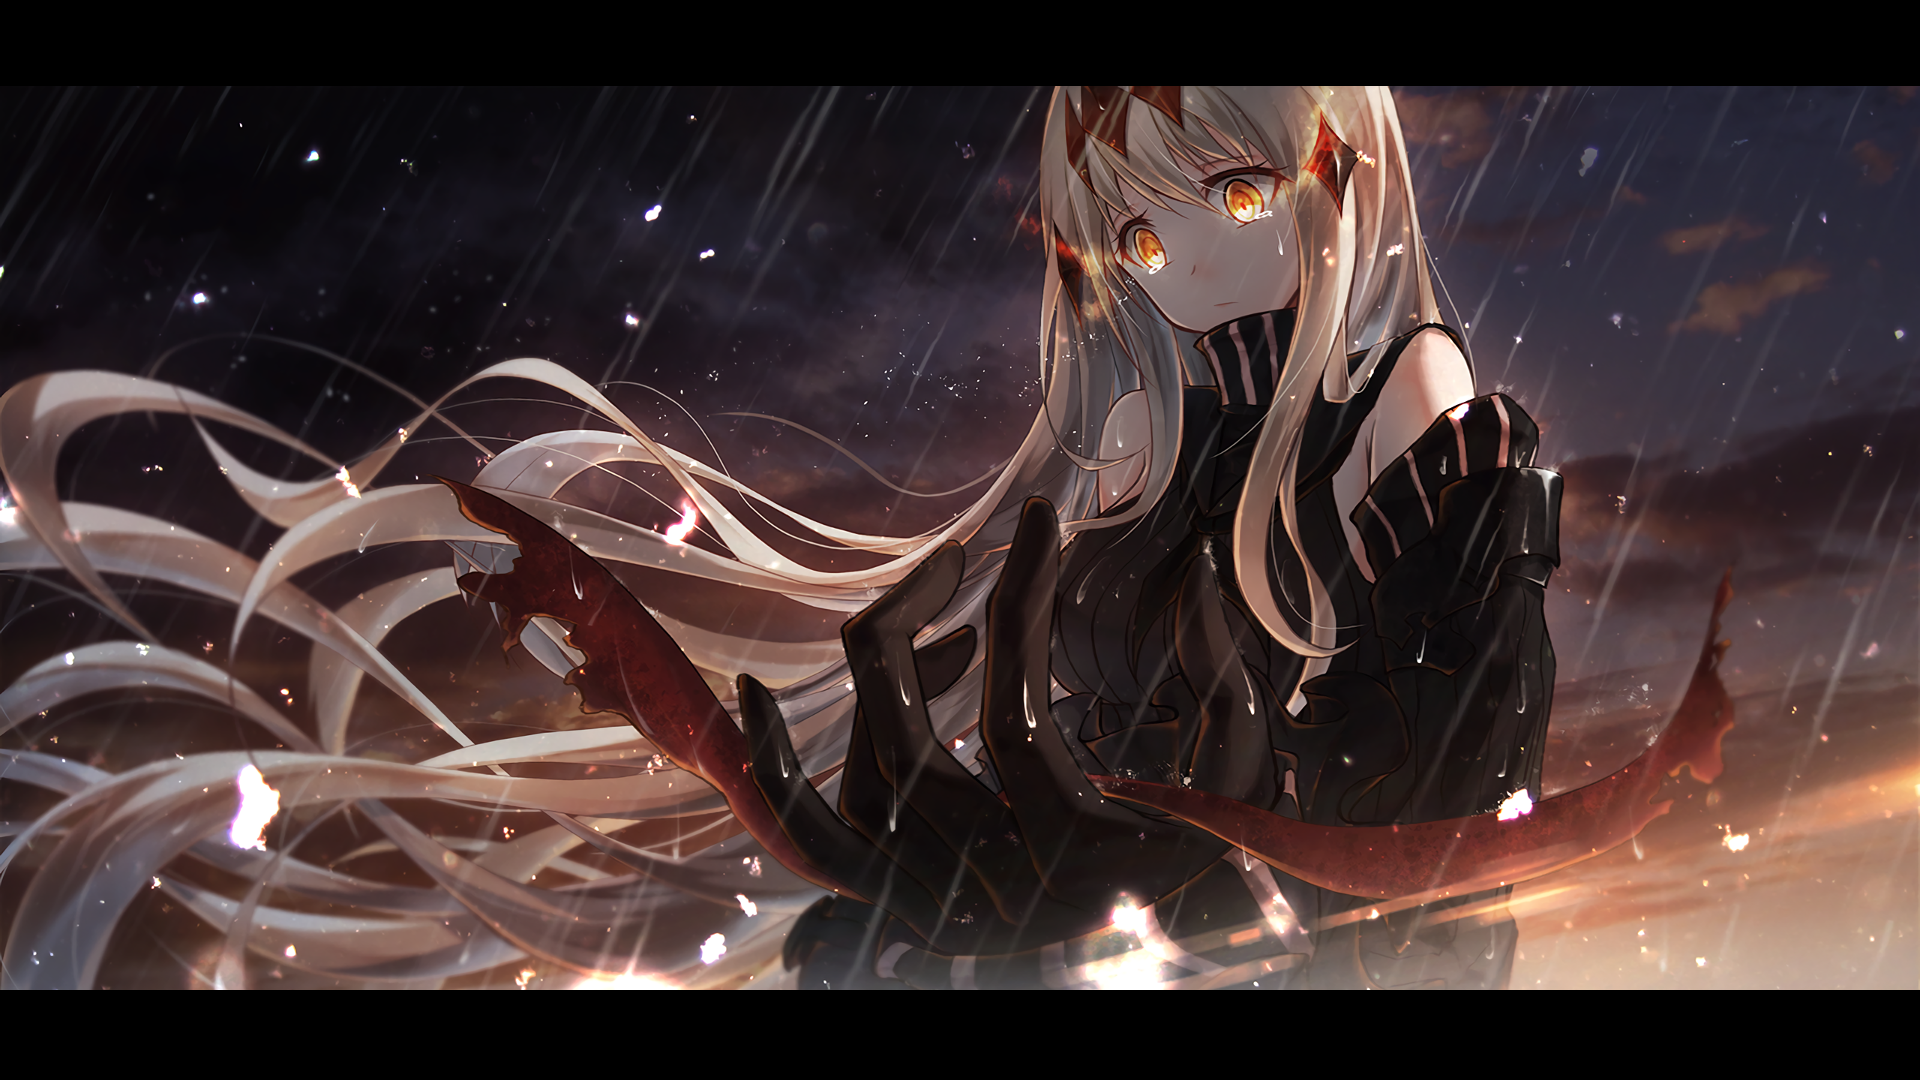 Anime Kantai Collection HD Wallpaper by Bae.C / 裴.C